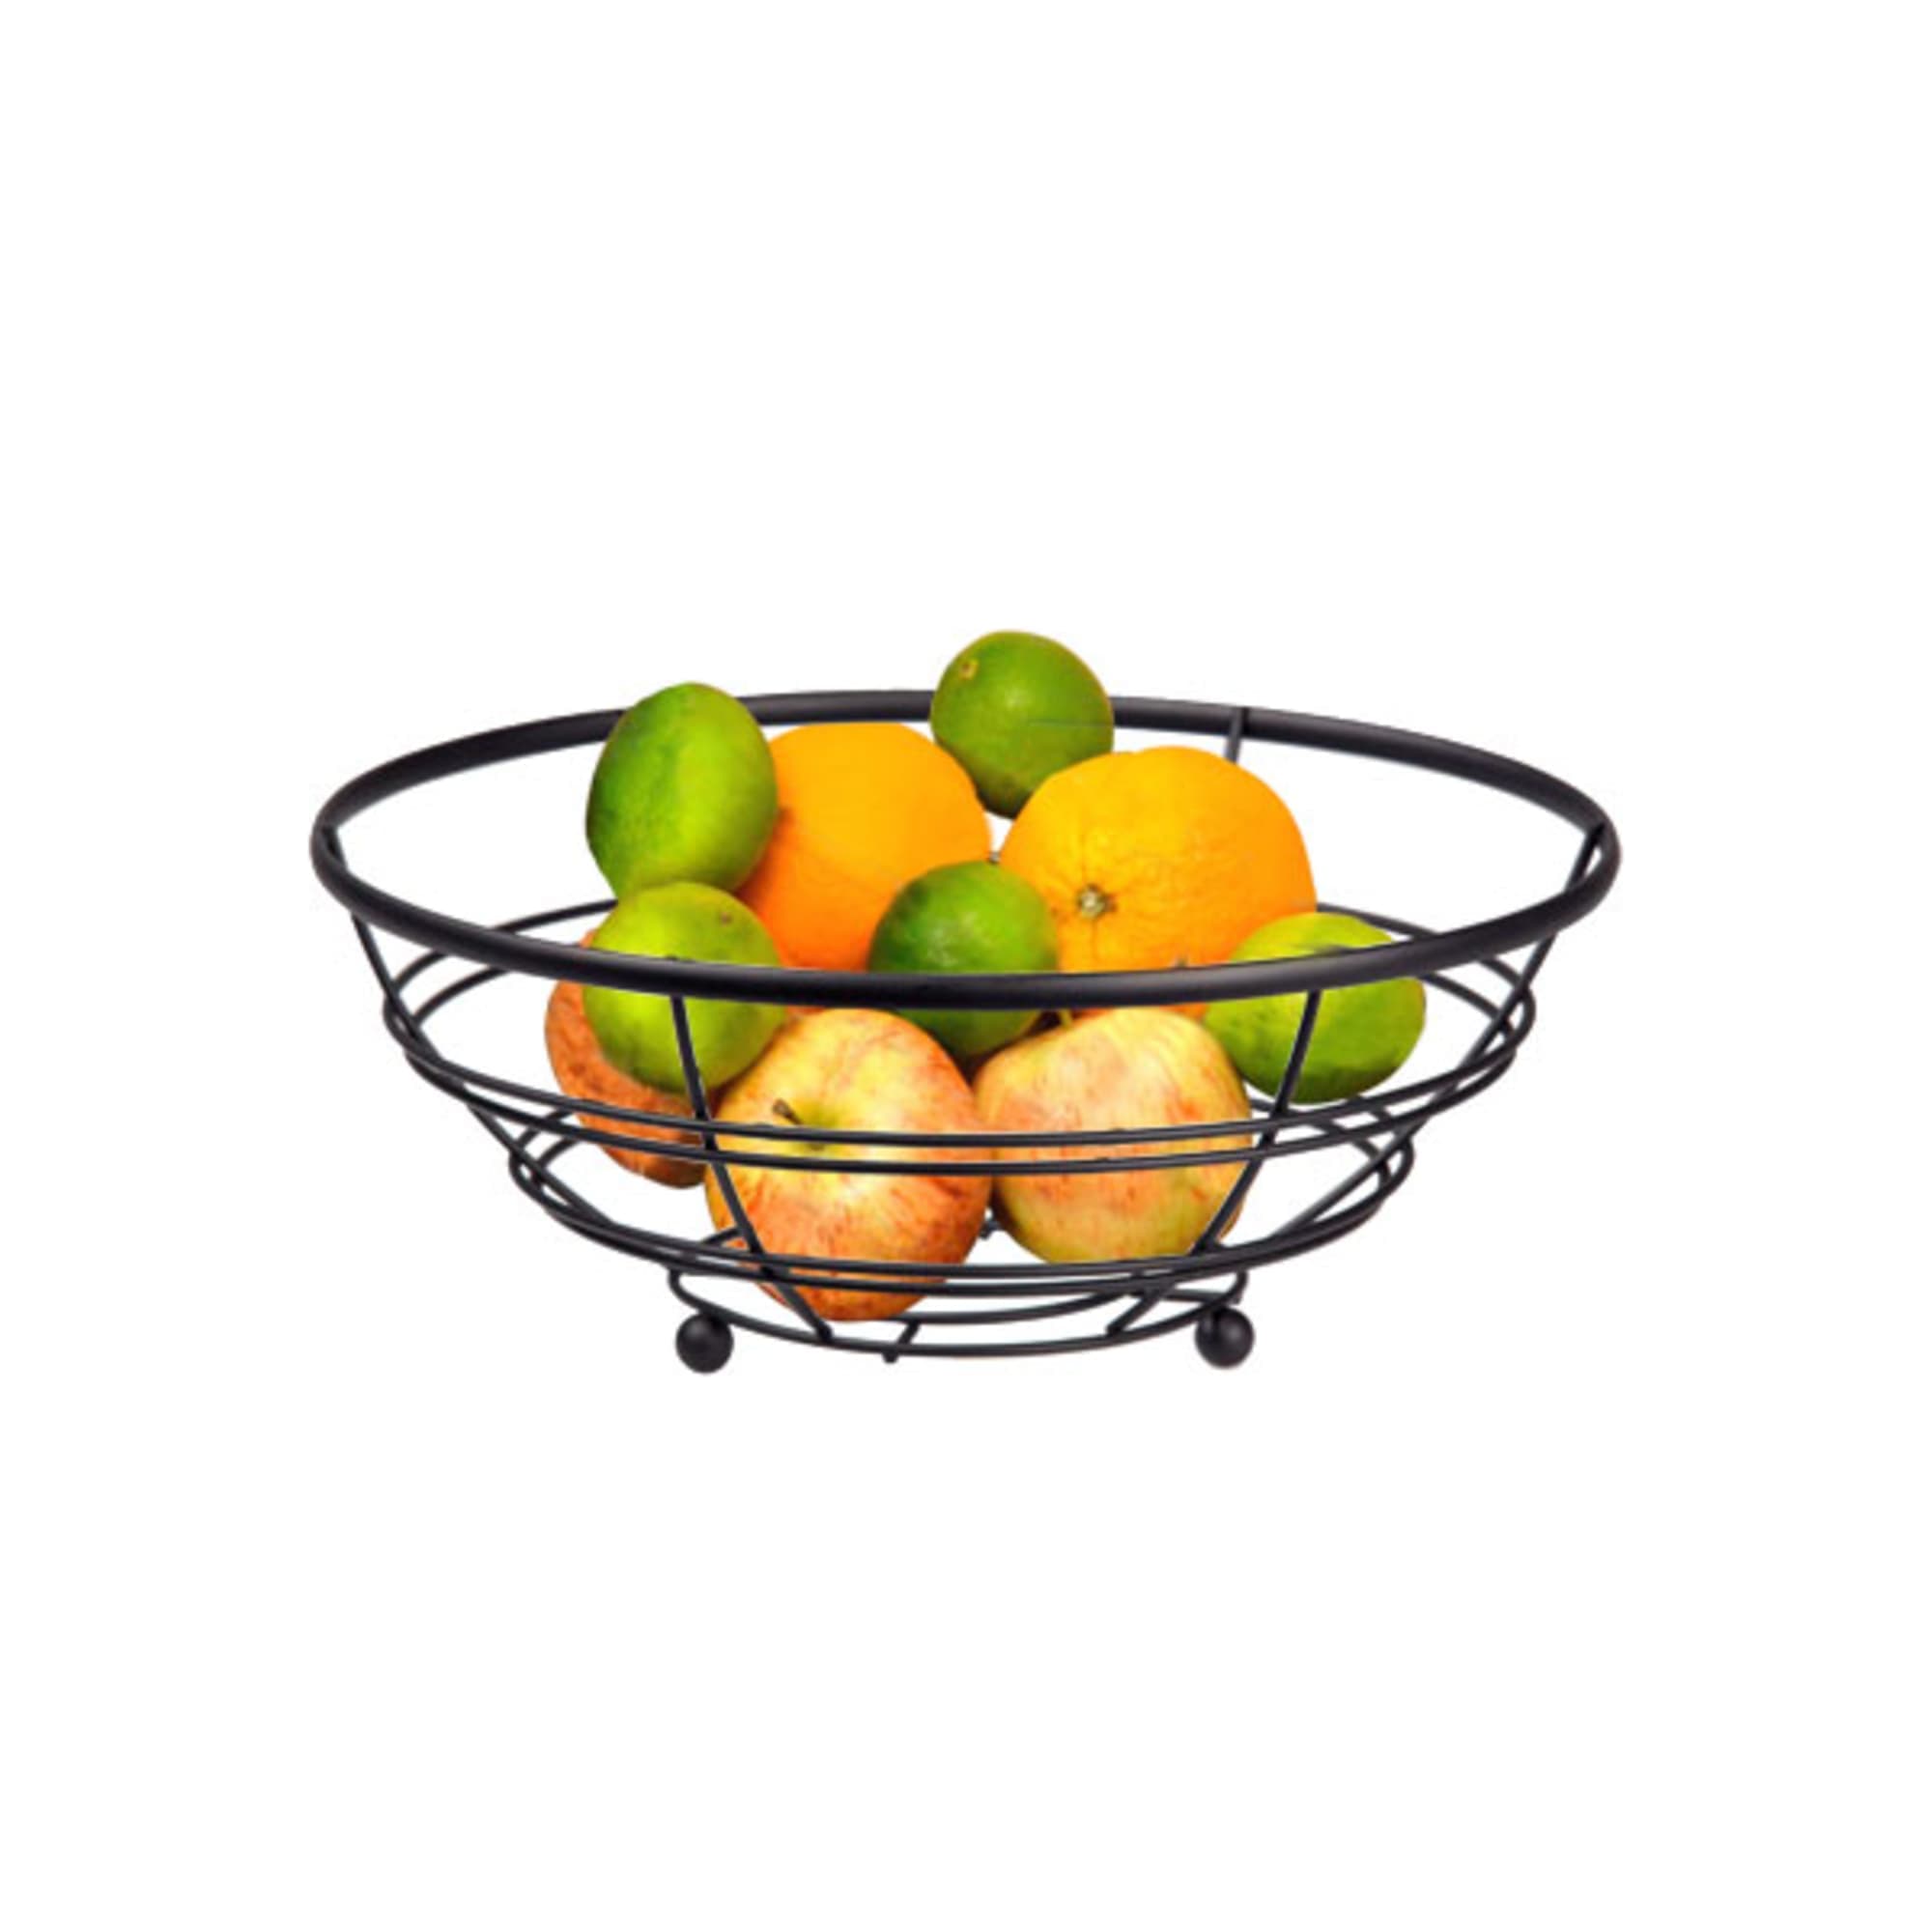 Home Basics Wire Collection Fruit Bowl, Black $4 EACH, CASE PACK OF 12